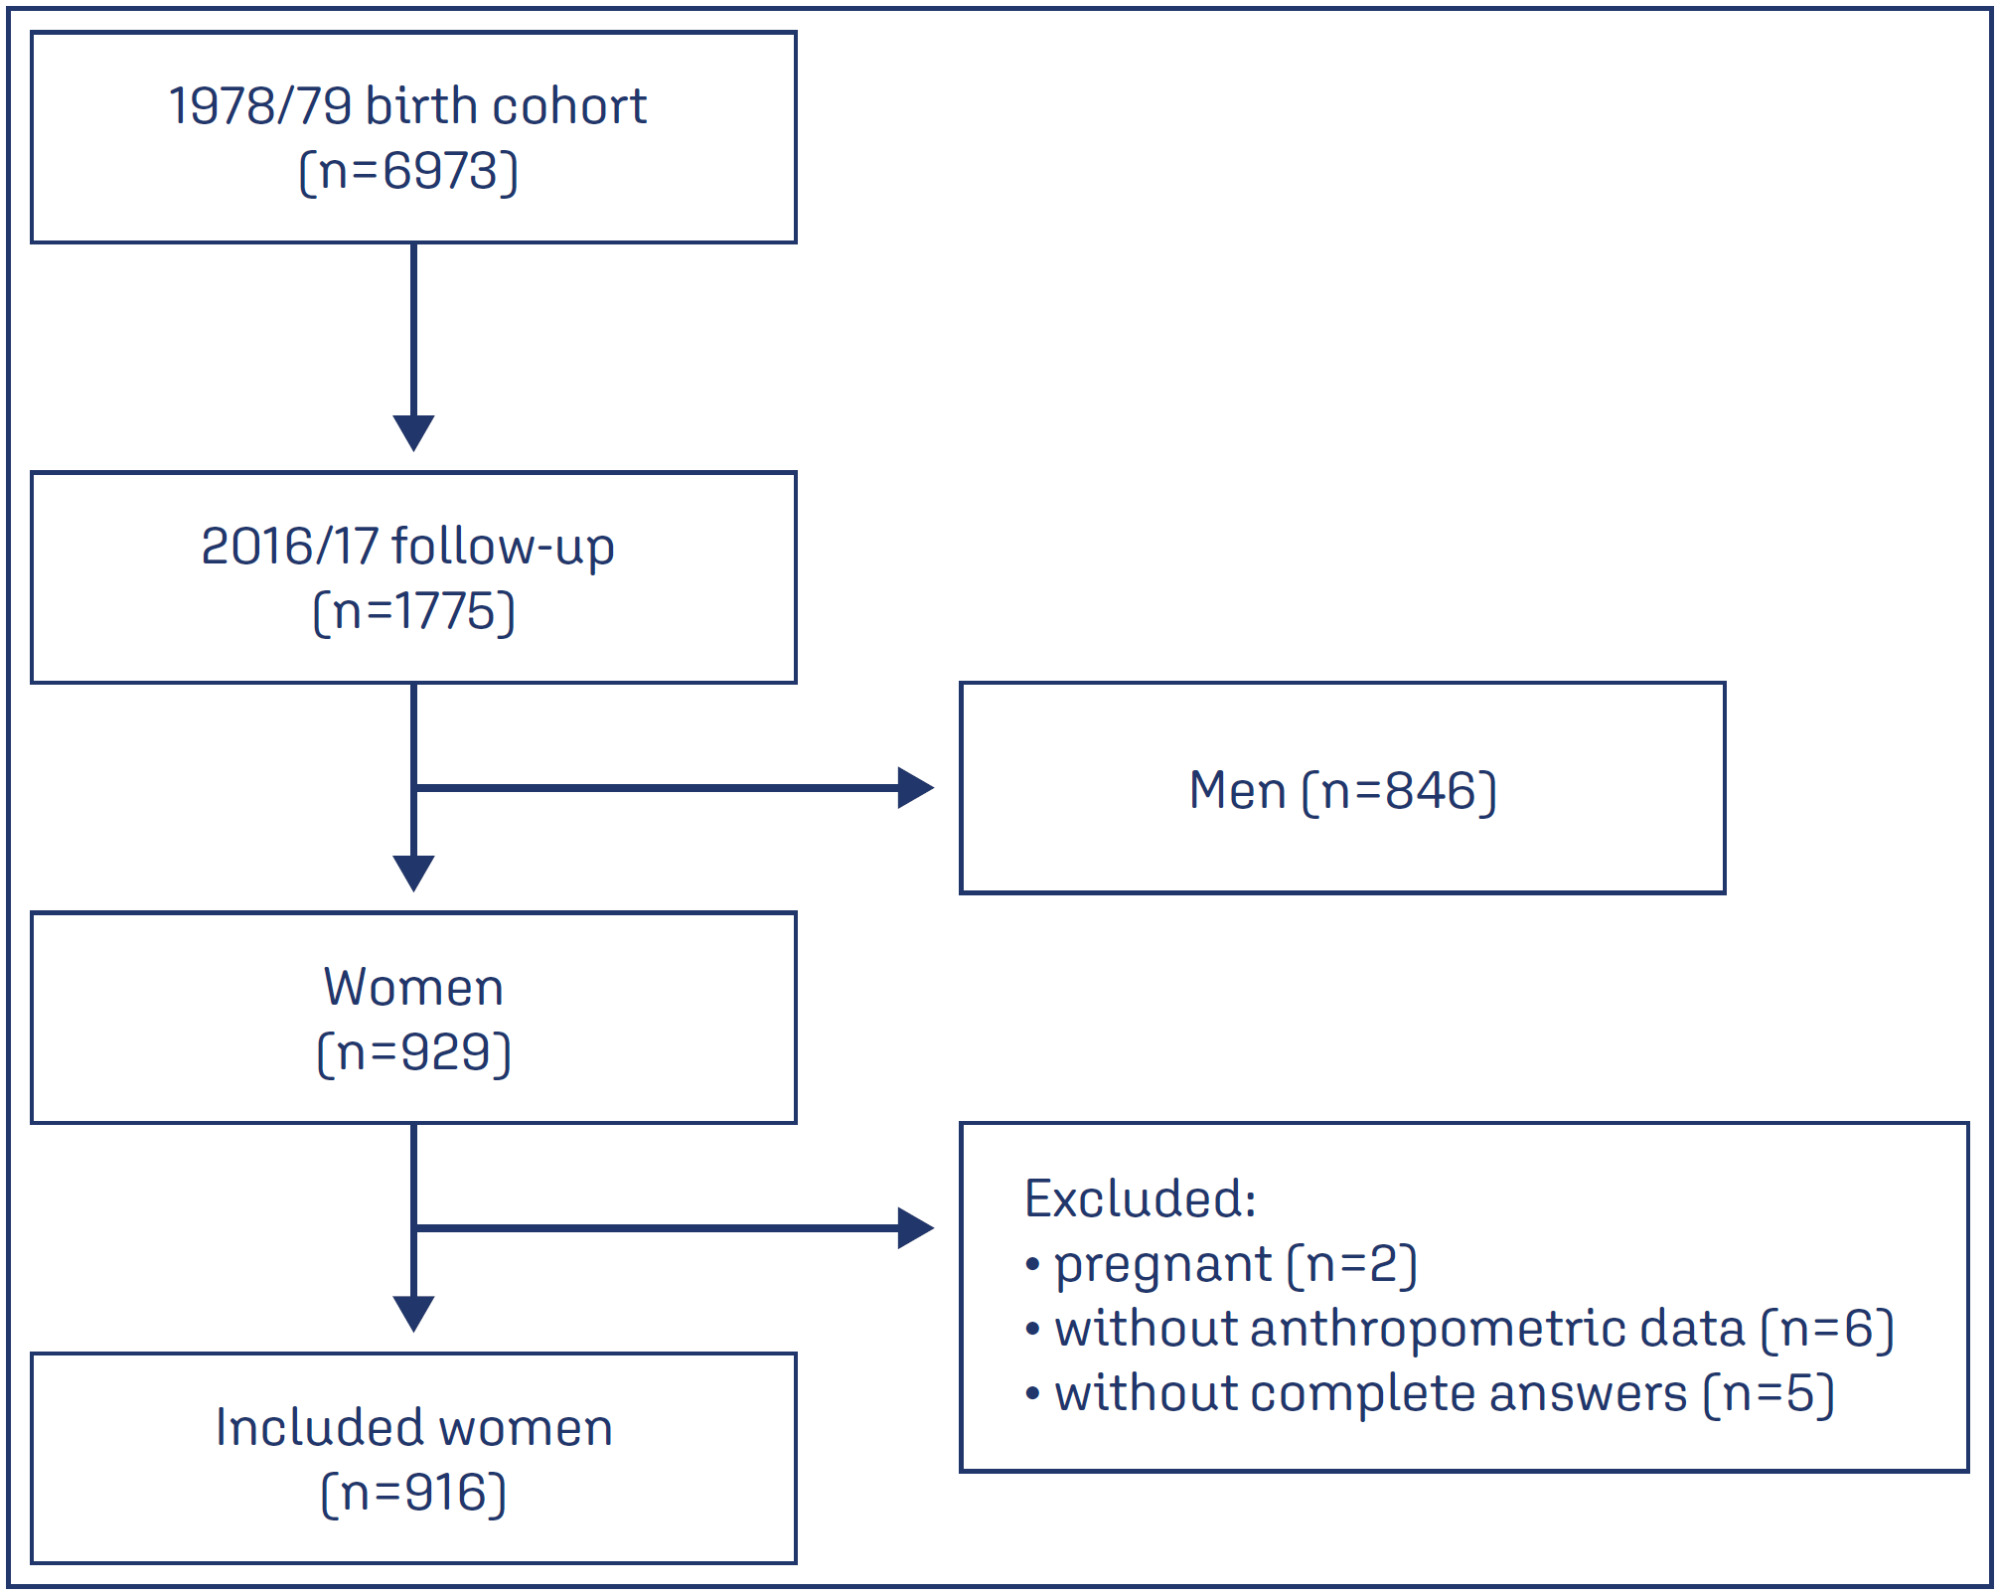 Sociodemographic and reproductive risk factors associated with metabolic syndrome in a population of Brazilian women from the city of Ribeirão Preto: a cross-sectional study